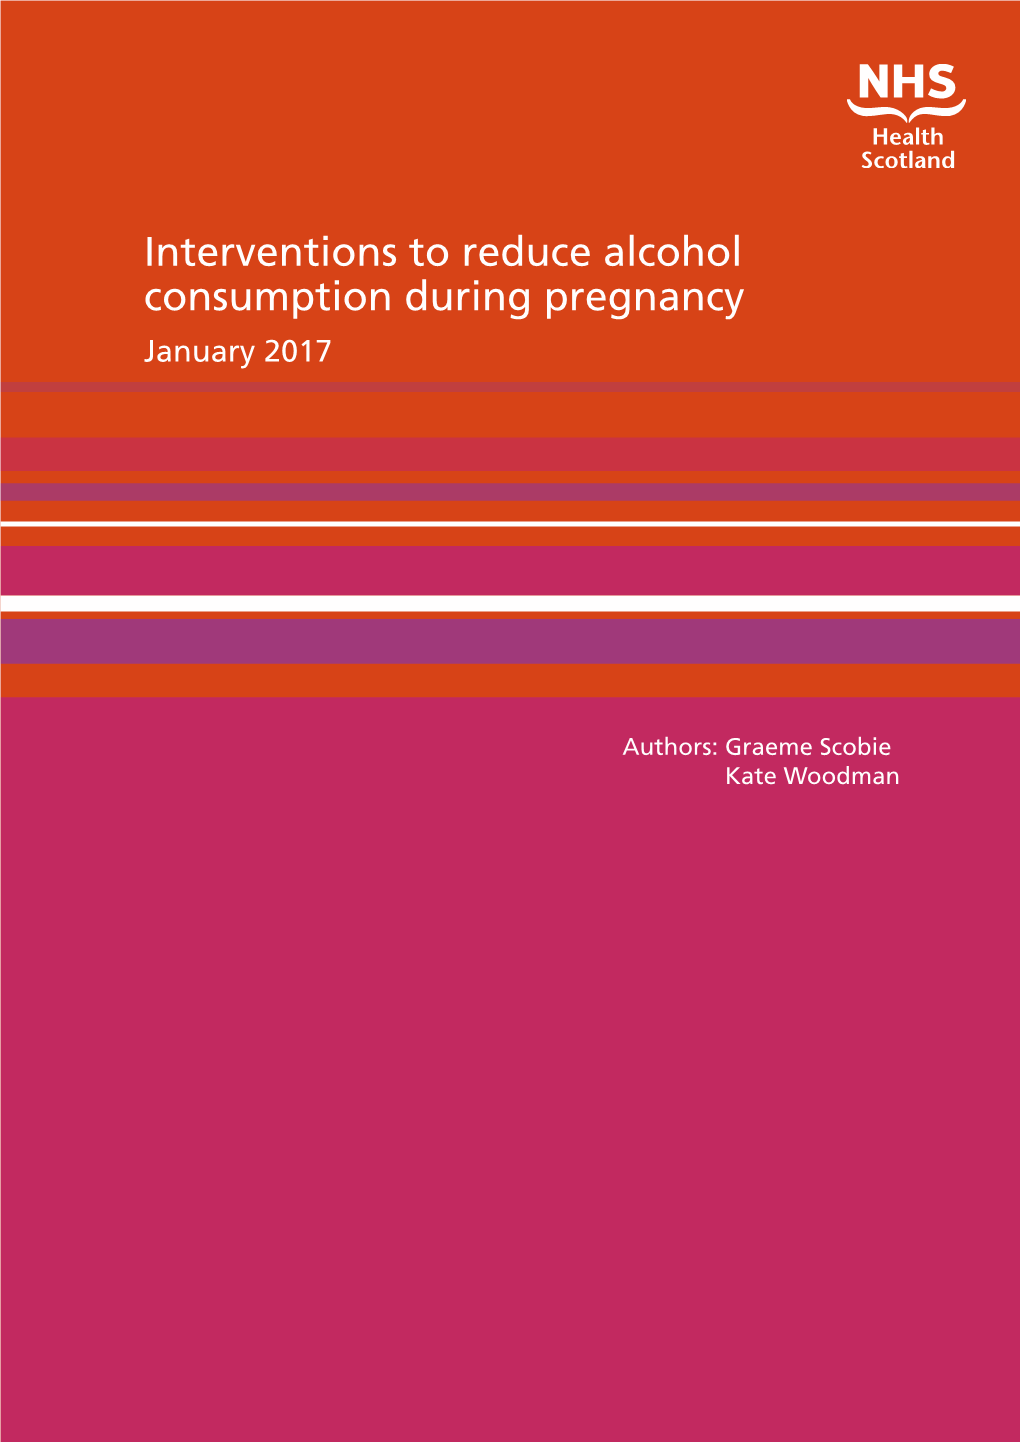 Interventions to Reduce Alcohol Consumption During Pregnancy January 2017